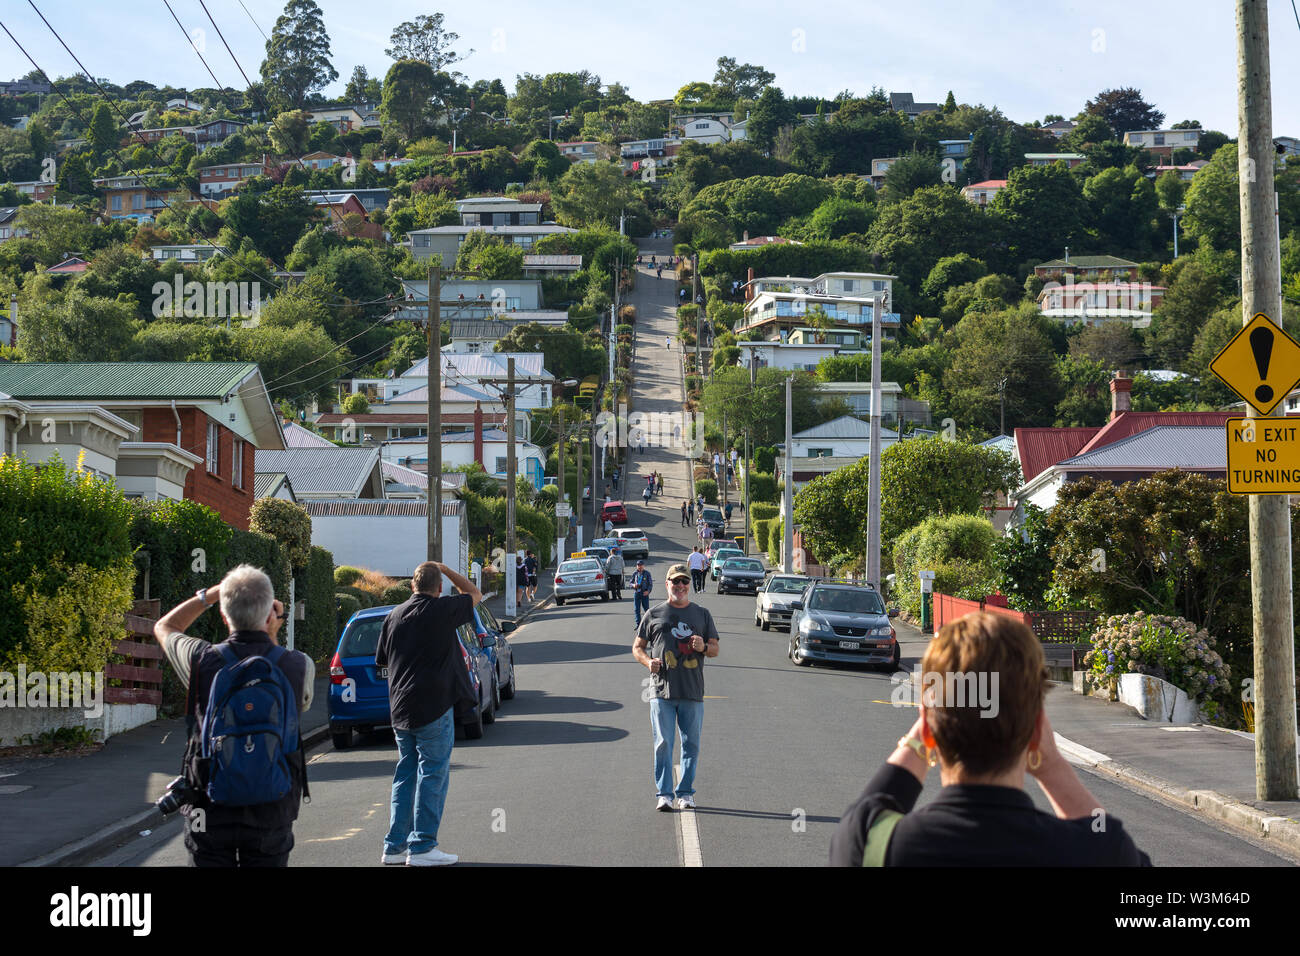 Dunedin, Otago, New Zealand. 4th February 2018. People taking photos and posing for pictures on Baldwin Street. Credit: Jonathan Stock Photo